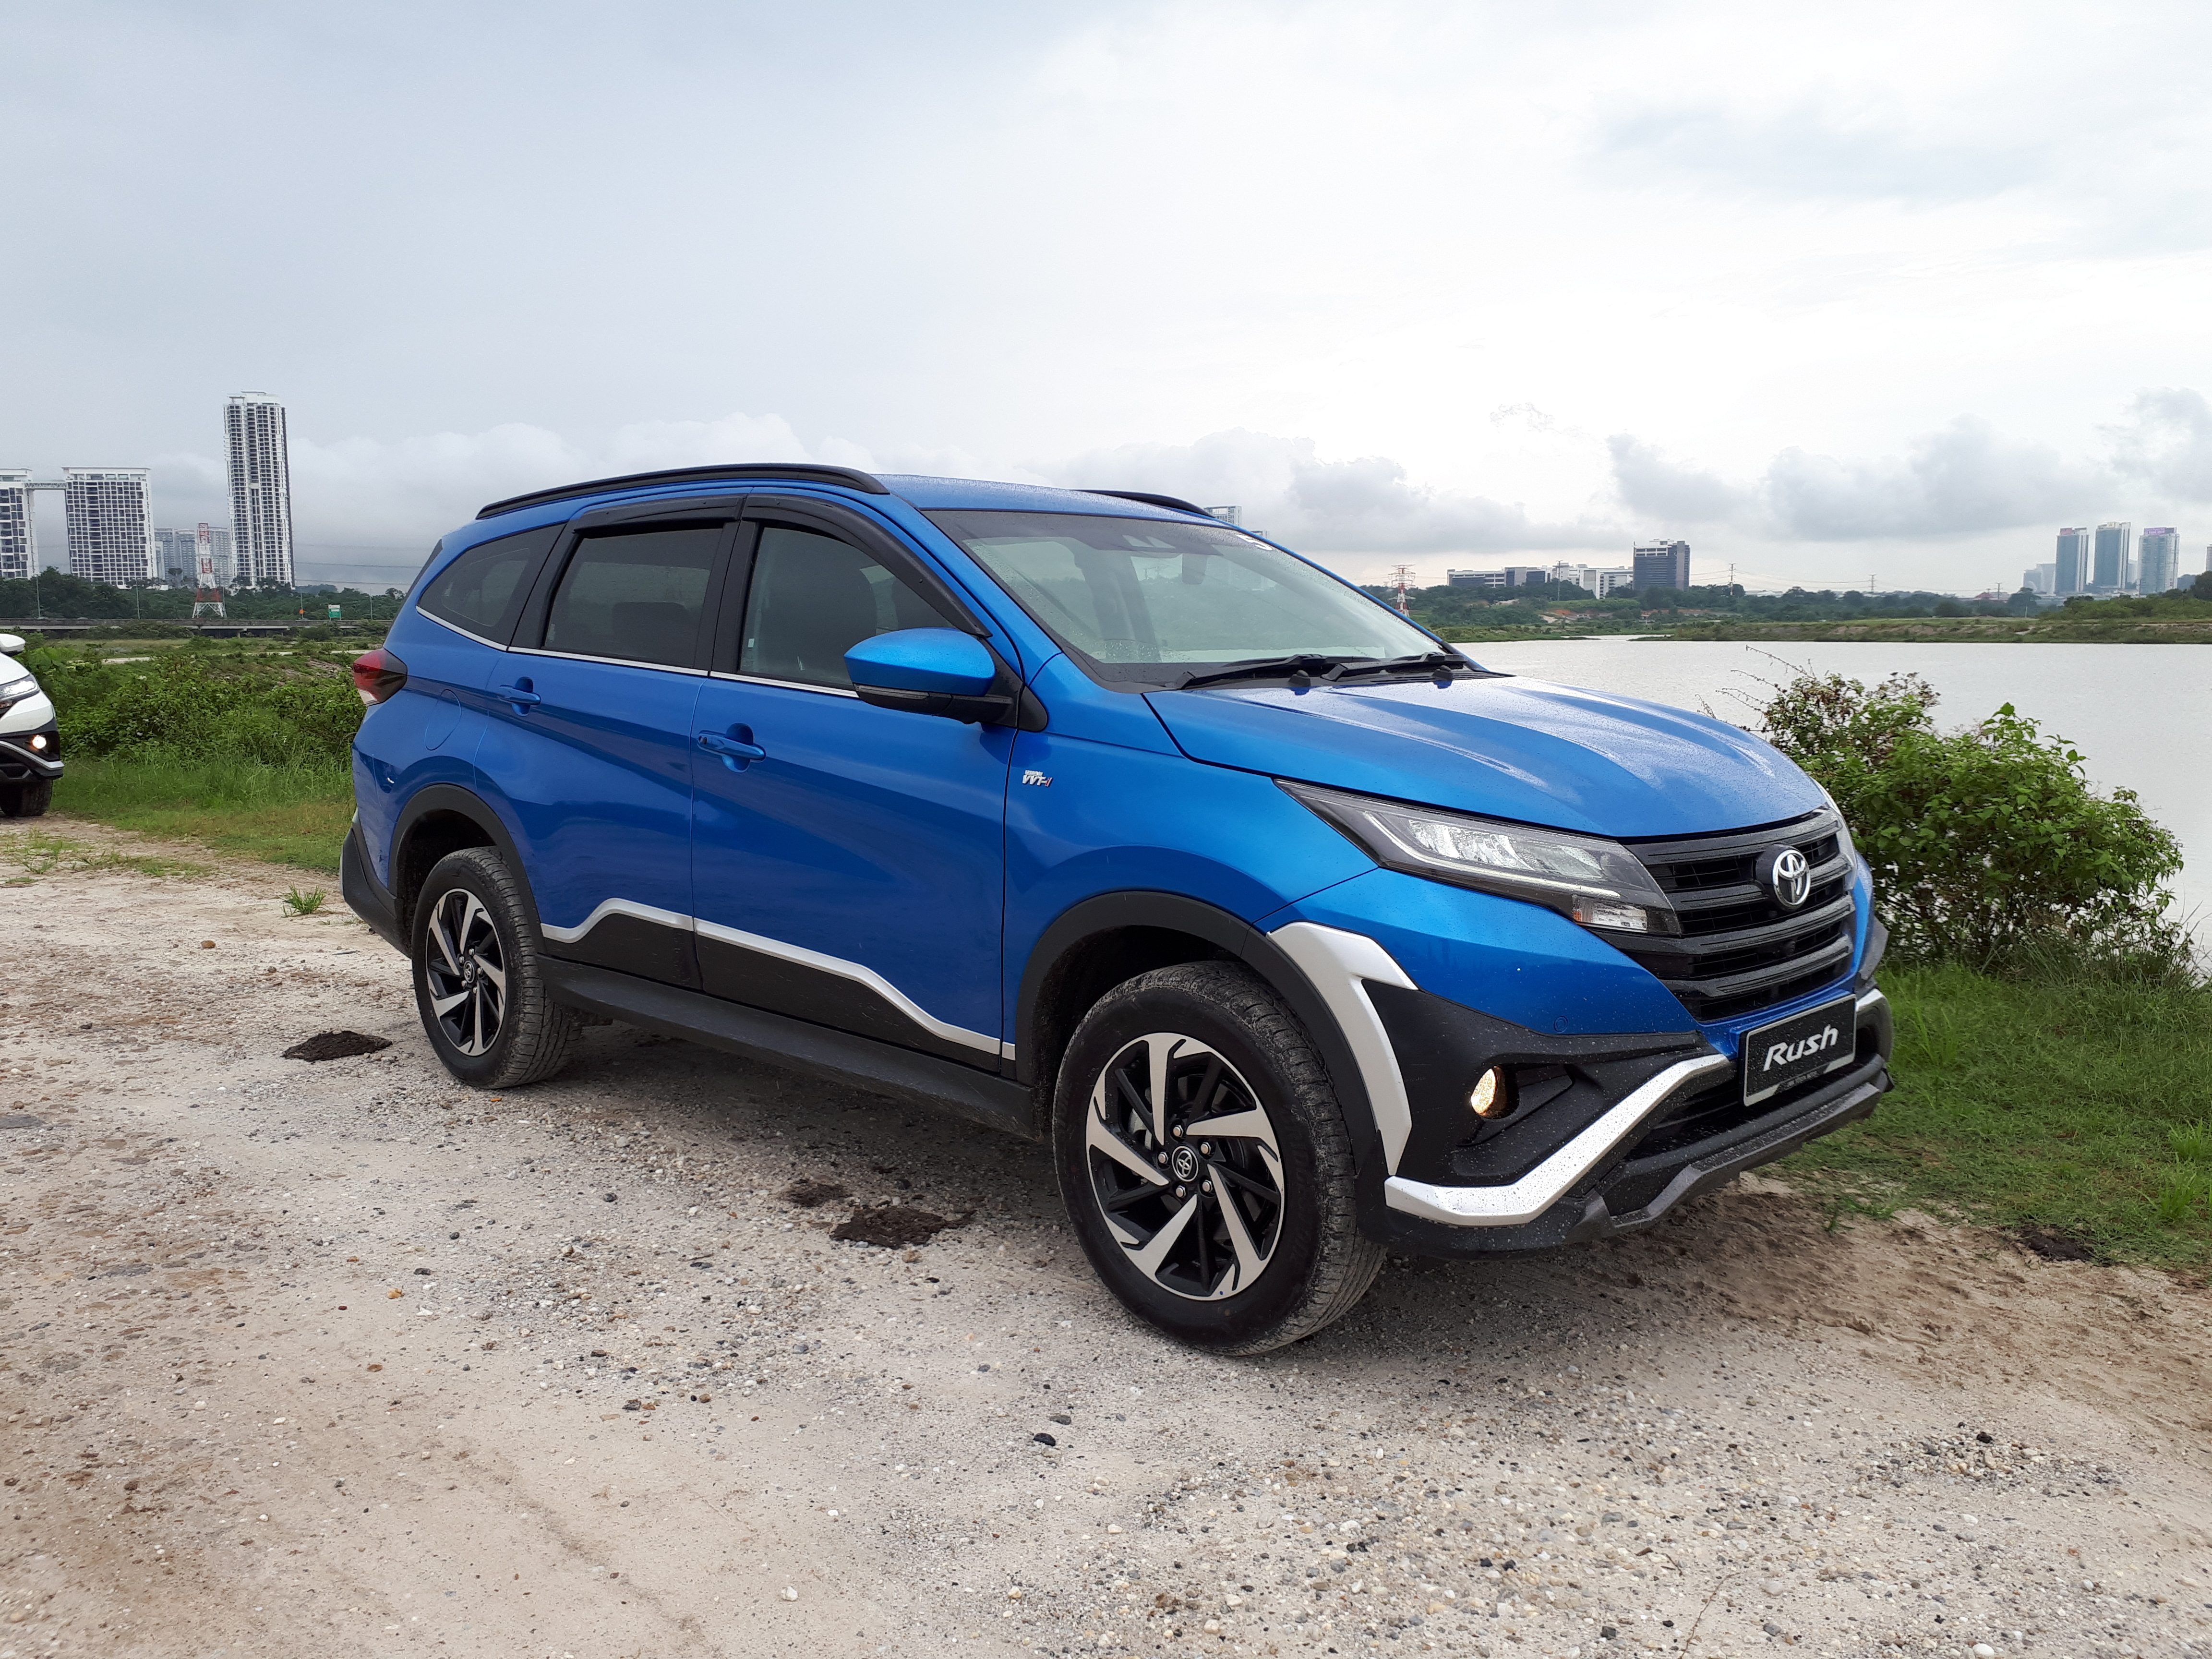 FEATURE AllNew 2019 Toyota Rush SUV Launched! [+Videos]  News and